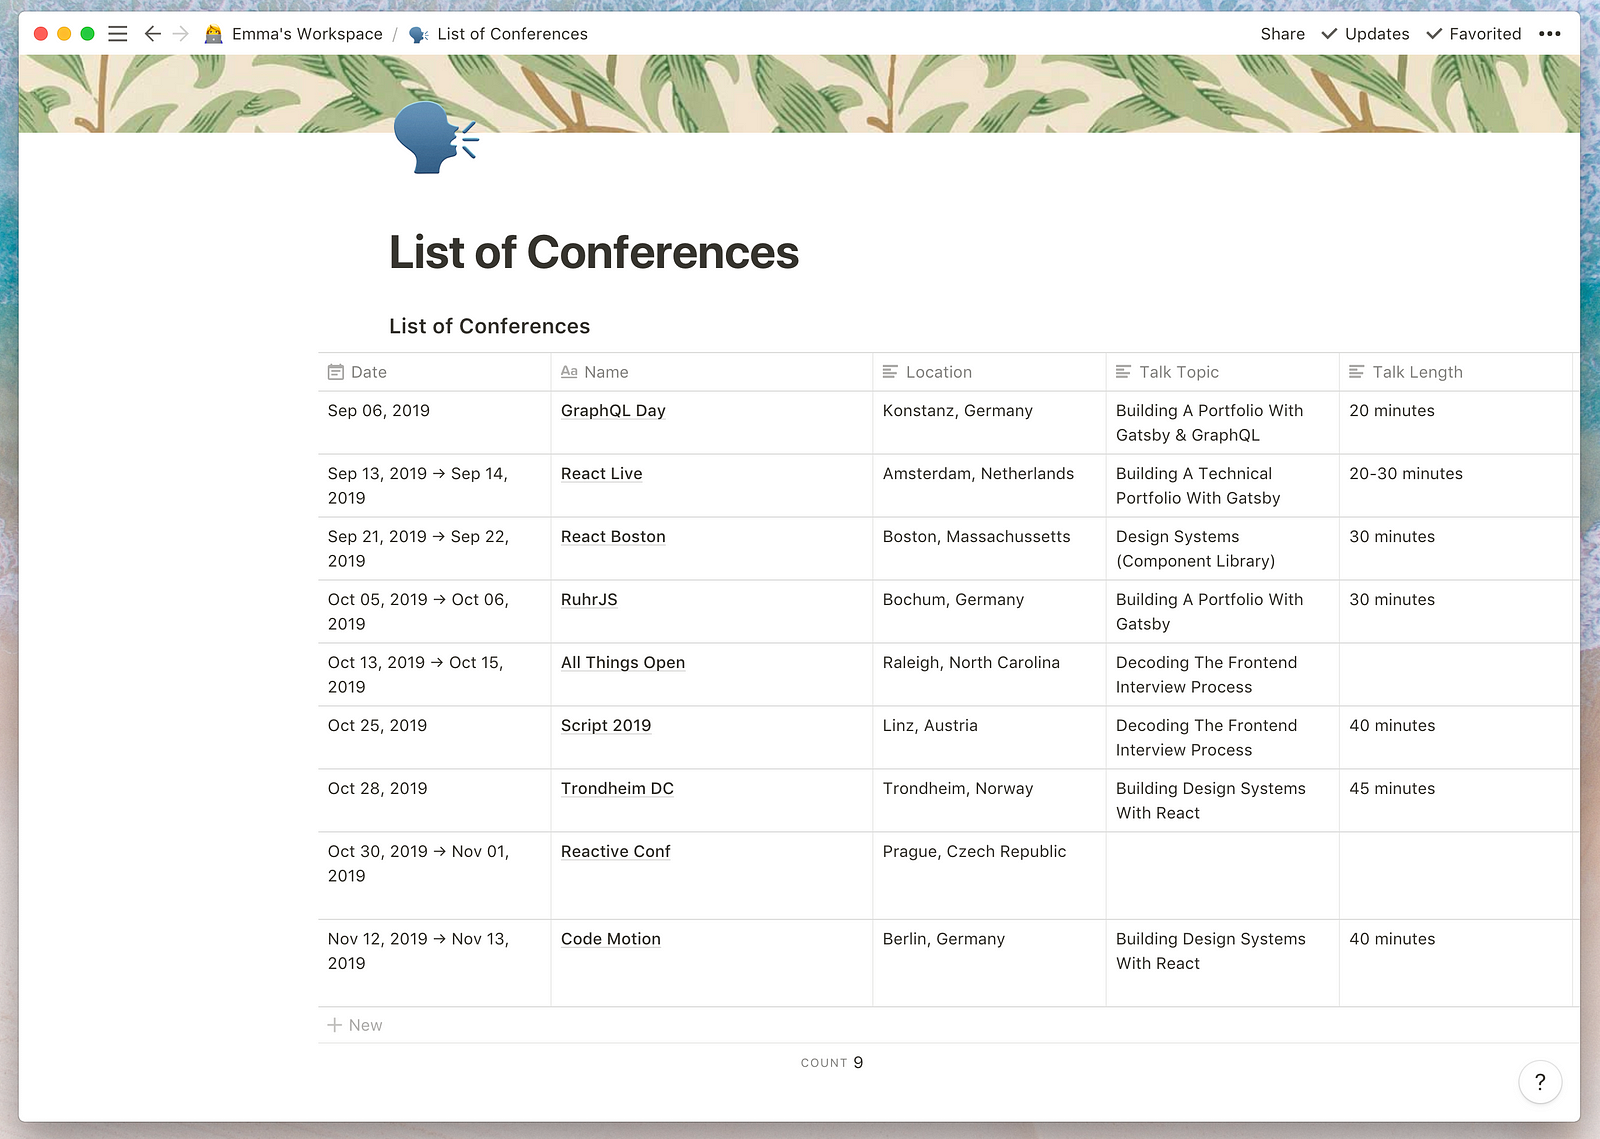 List of conferences